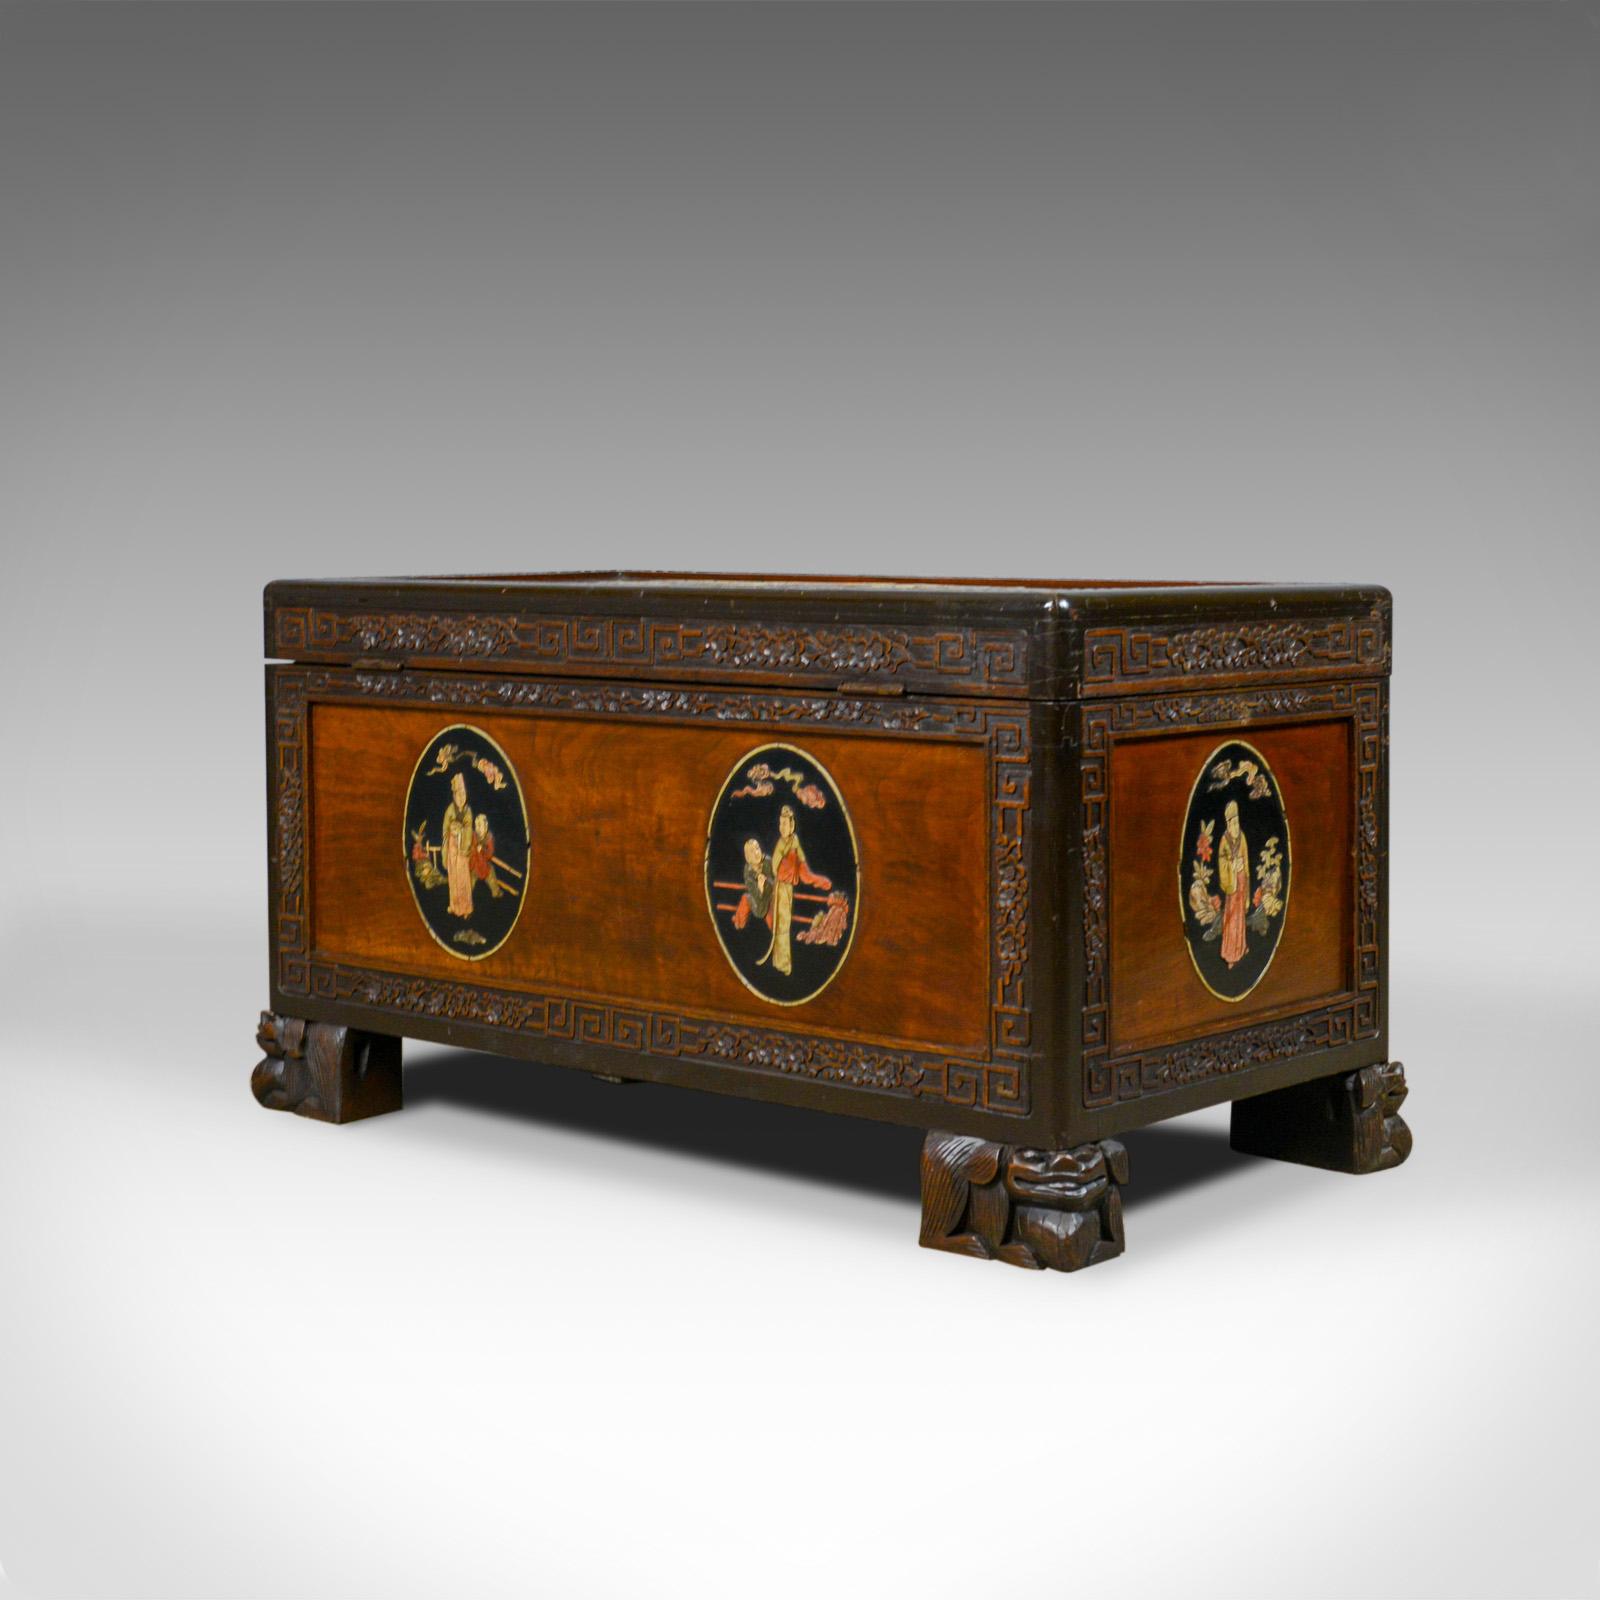 20th Century Chinese Camphorwood Chest, Oriental Inlaid Scenes, Trunk, Art Deco Period